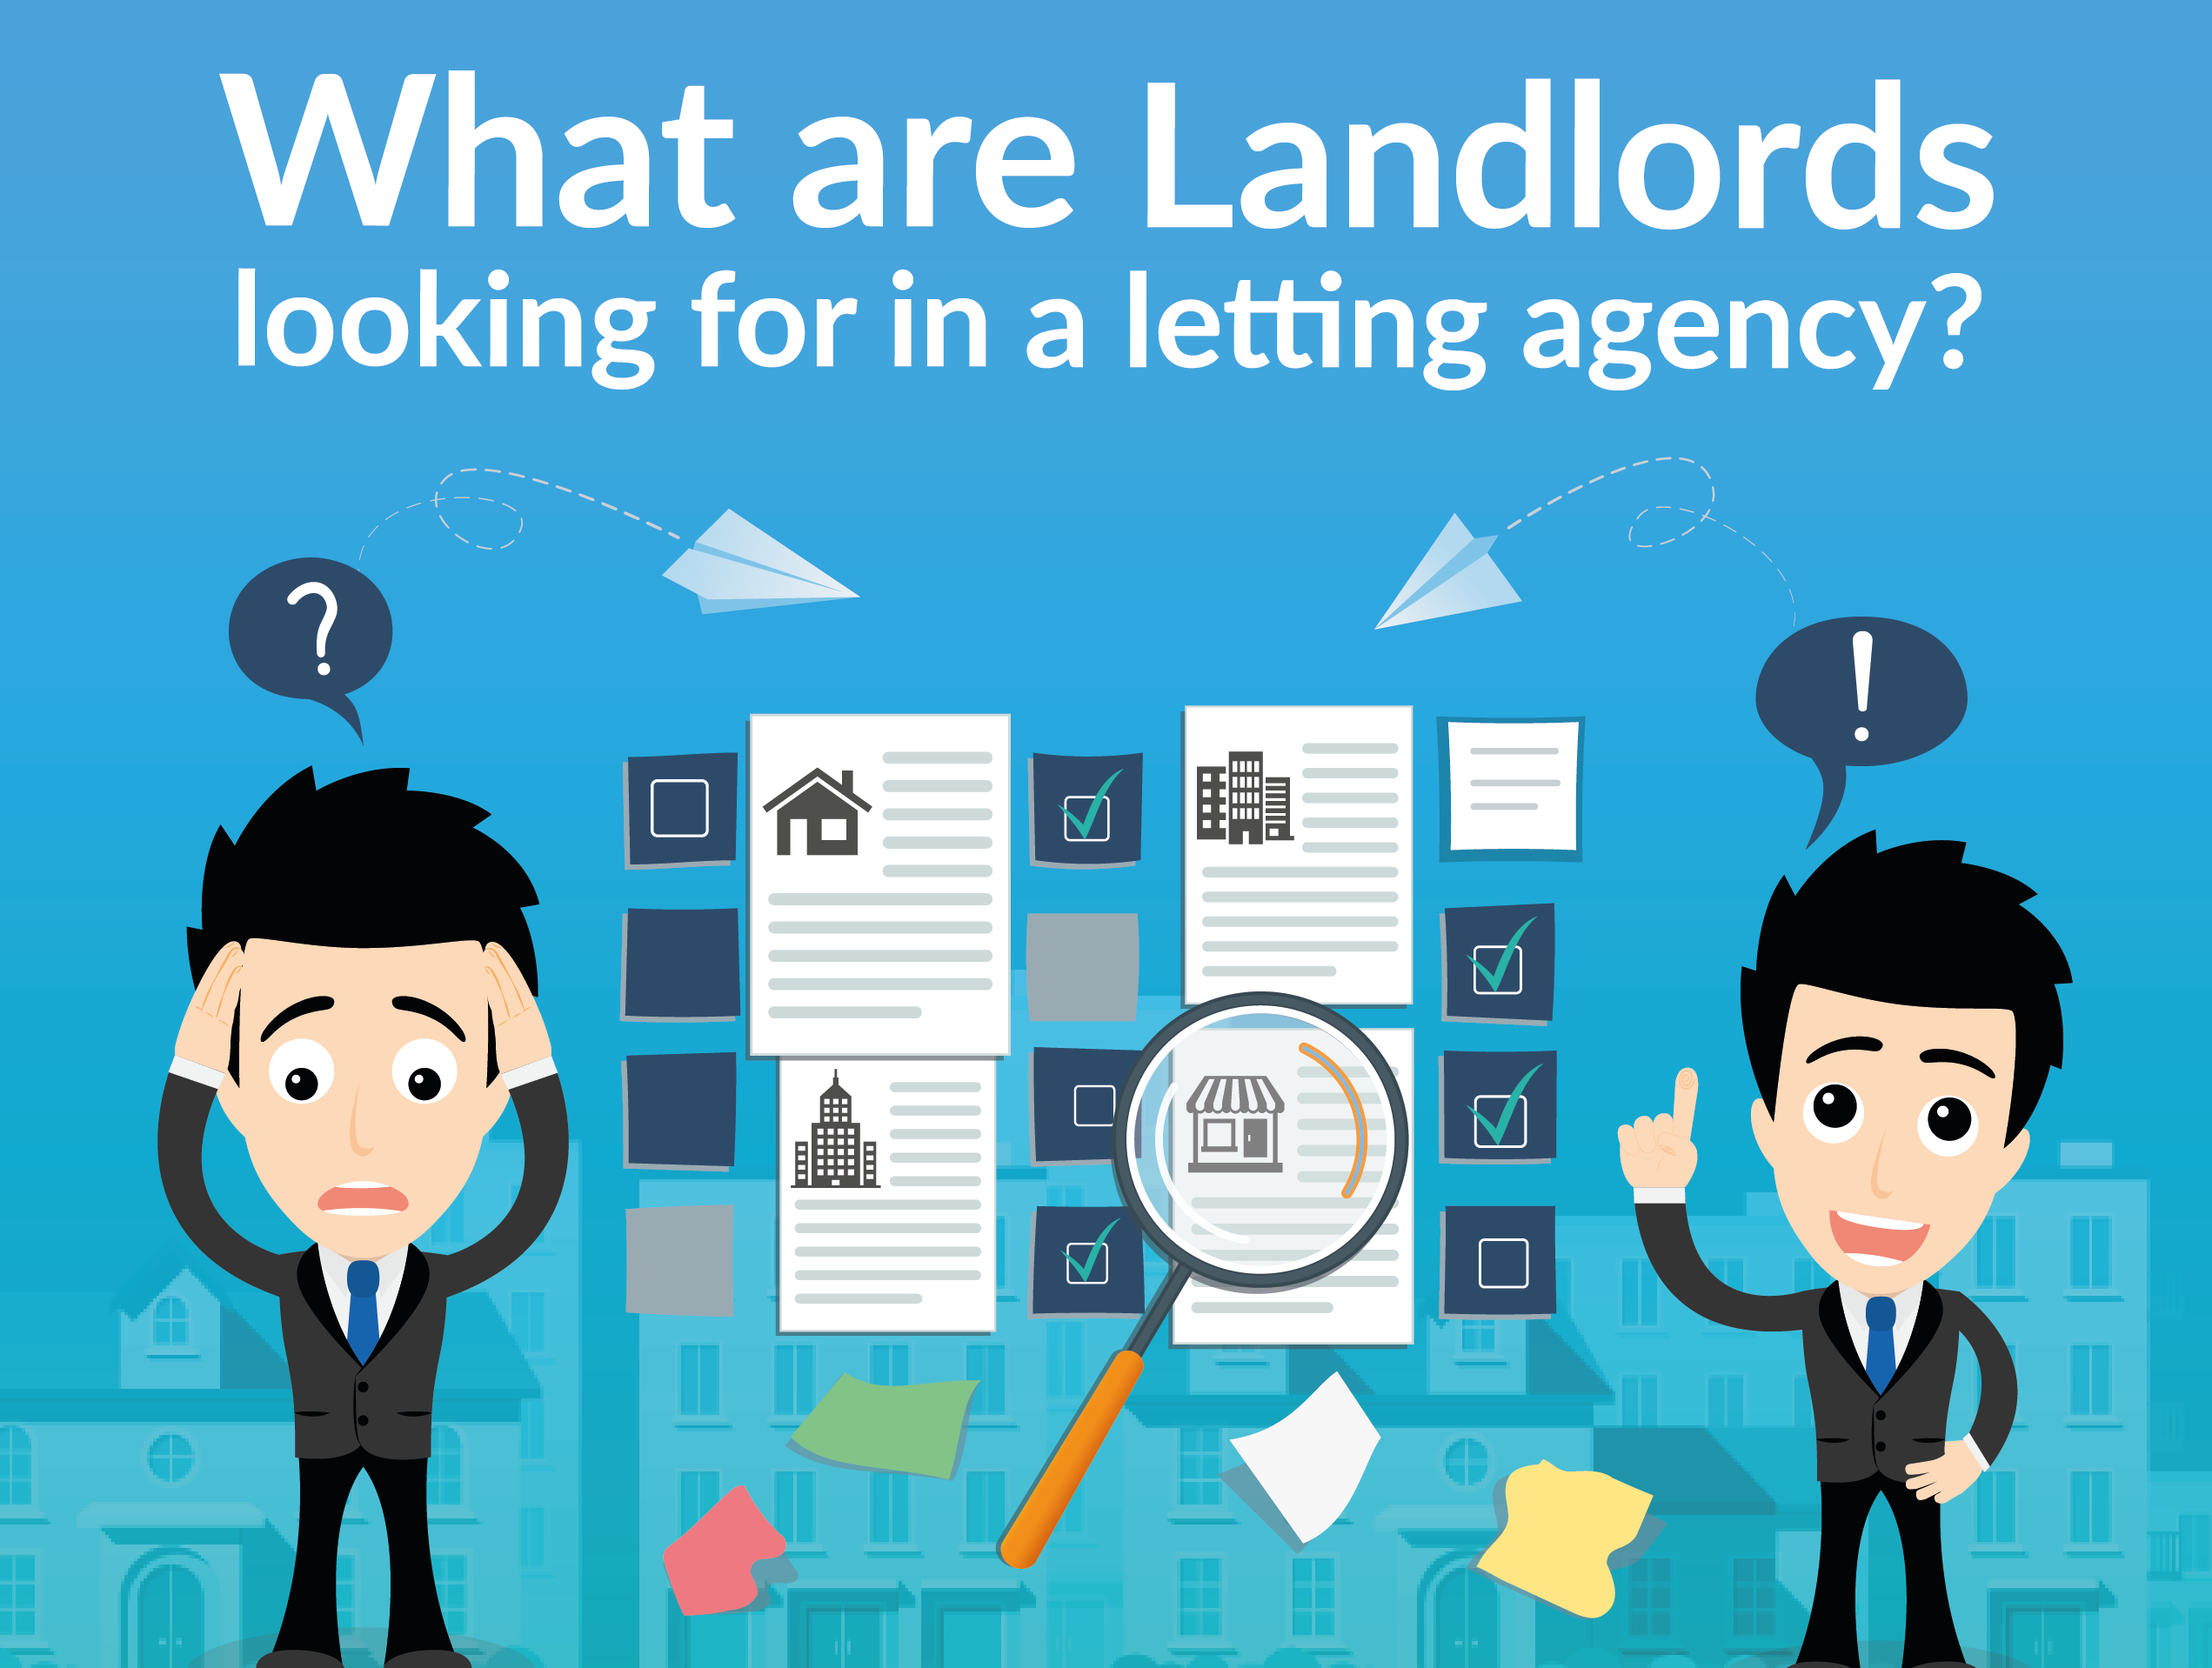 What are landlords looking for in a letting agency?